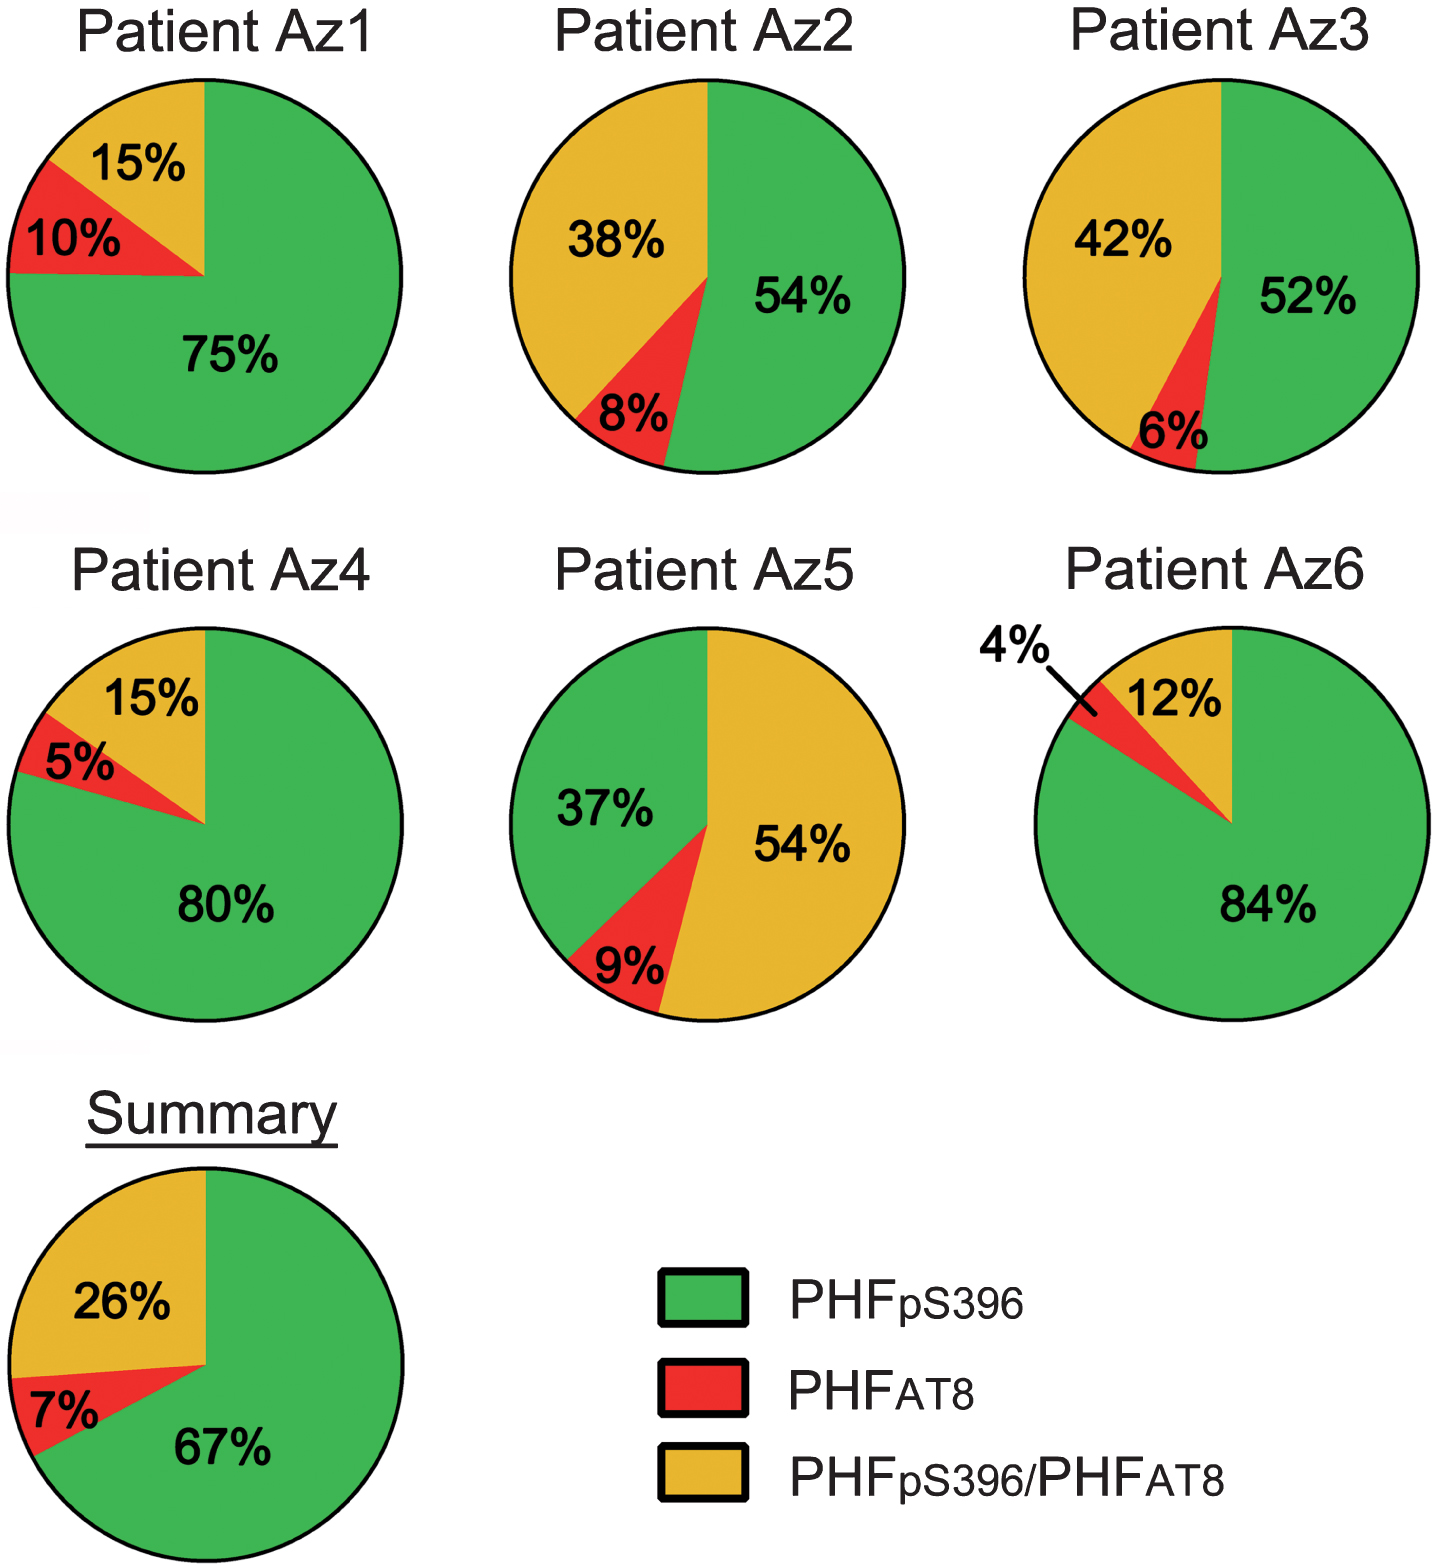 Pie charts showing the percentages of labeled neurons in double immunostaining studies for PHFpS396 and PHFAT8. Note the high variability of patterns. Average percentages of expression patterns are shown in the “Summary” chart, in which it is clear that there is a higher proportion of PHFpS396-ir neurons.